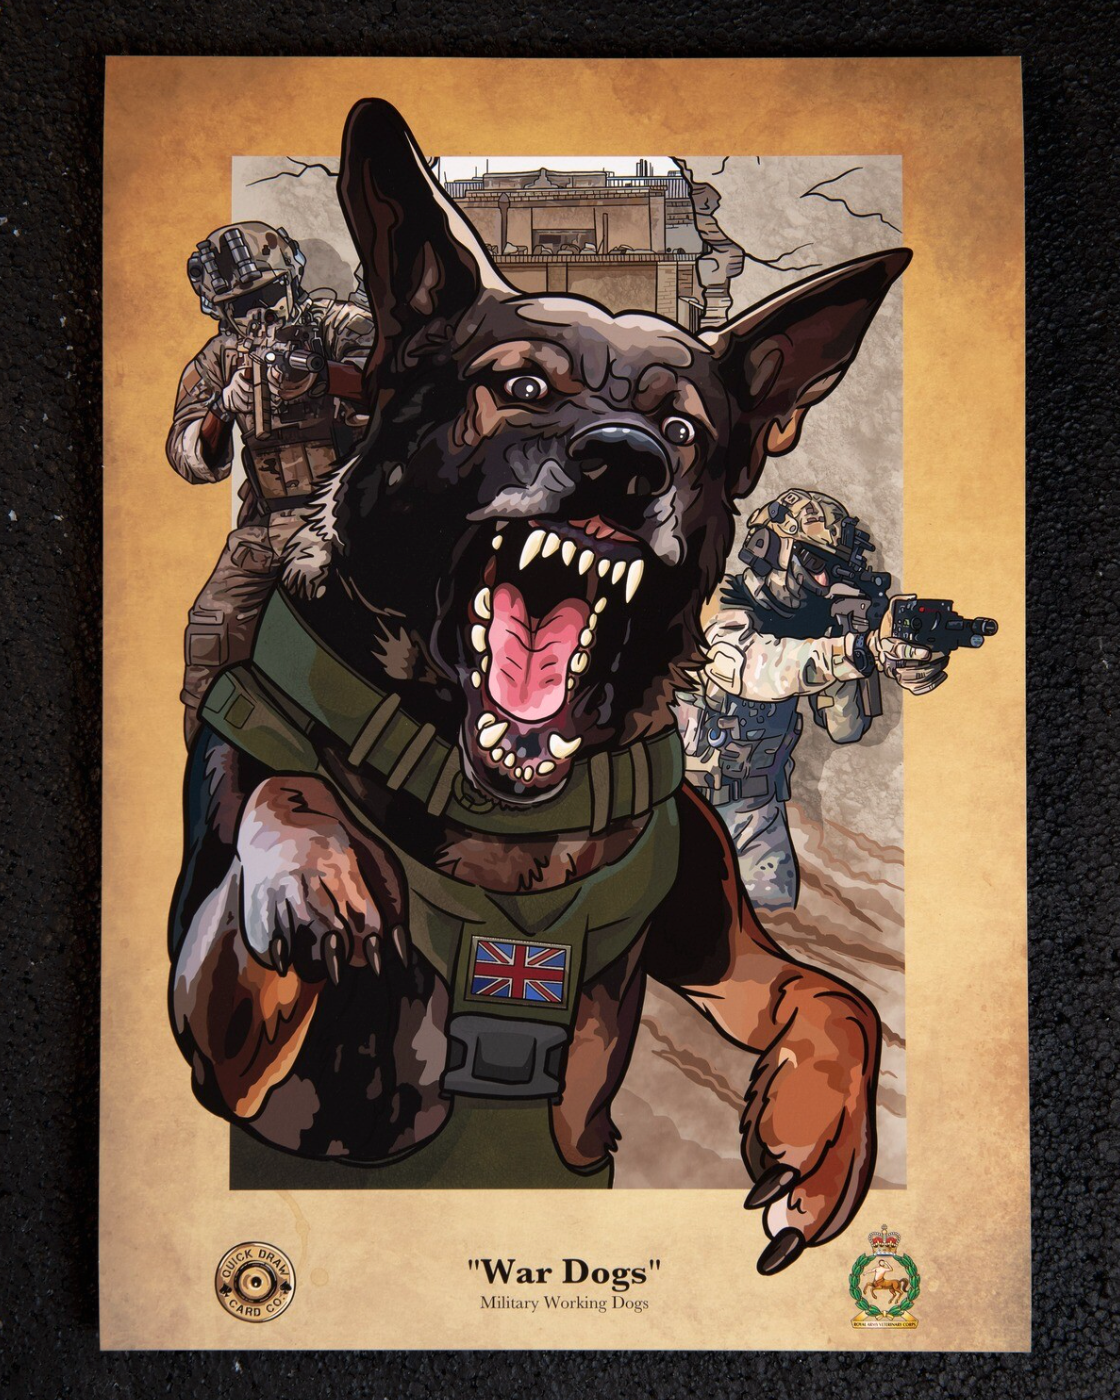 WAR DOGS - MILITARY WORKING DOGS